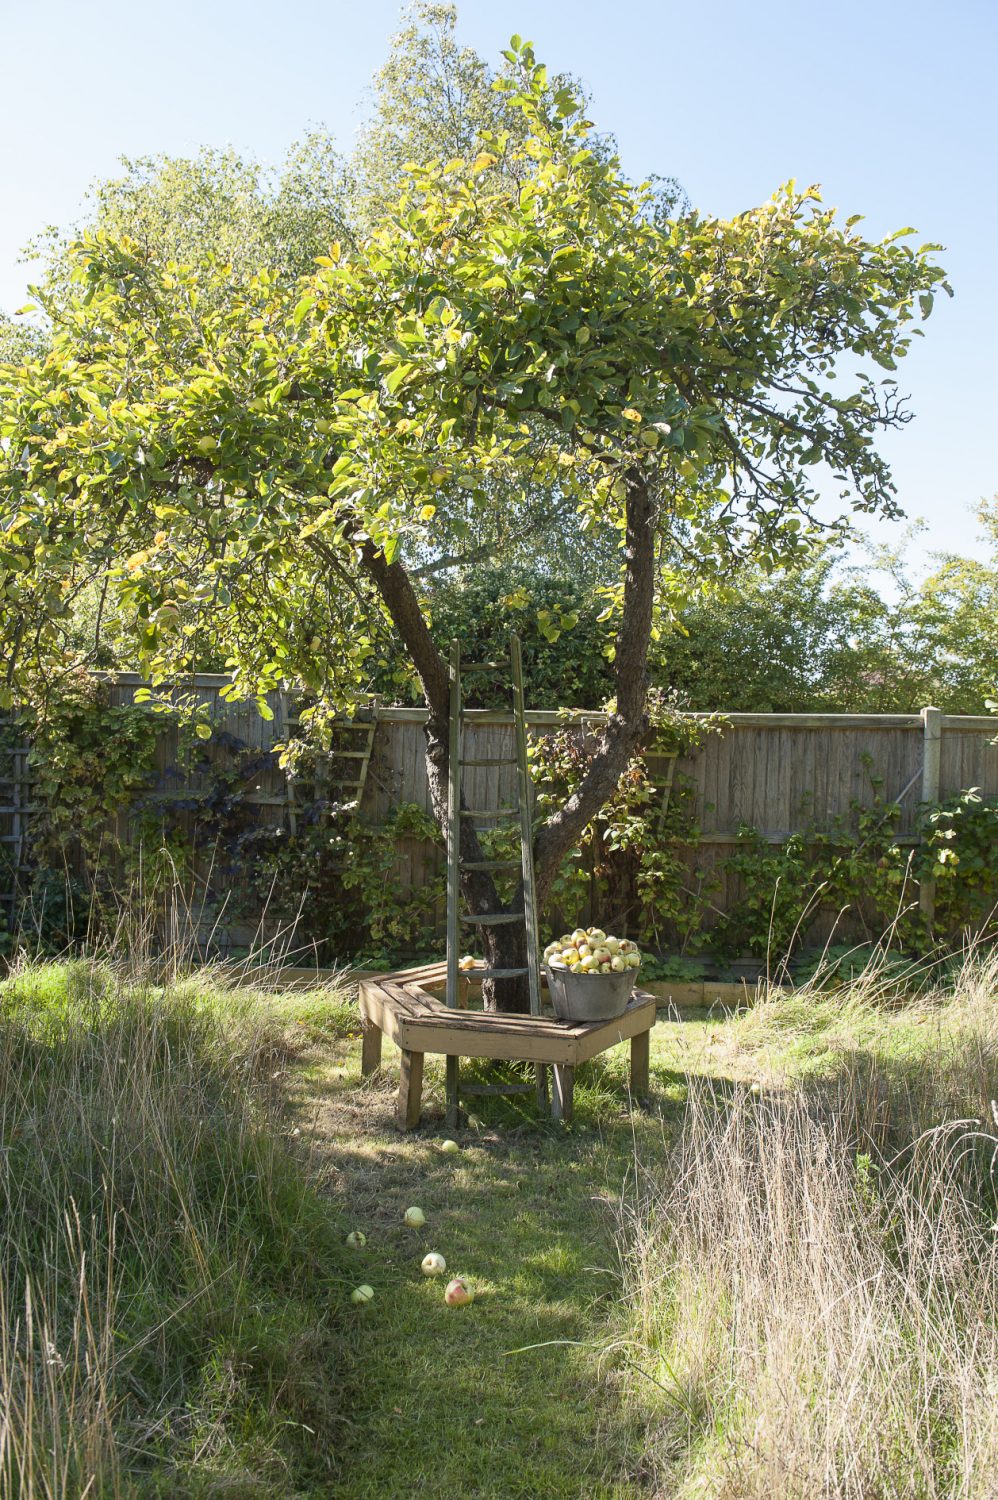 One of many fruit trees in the back garden